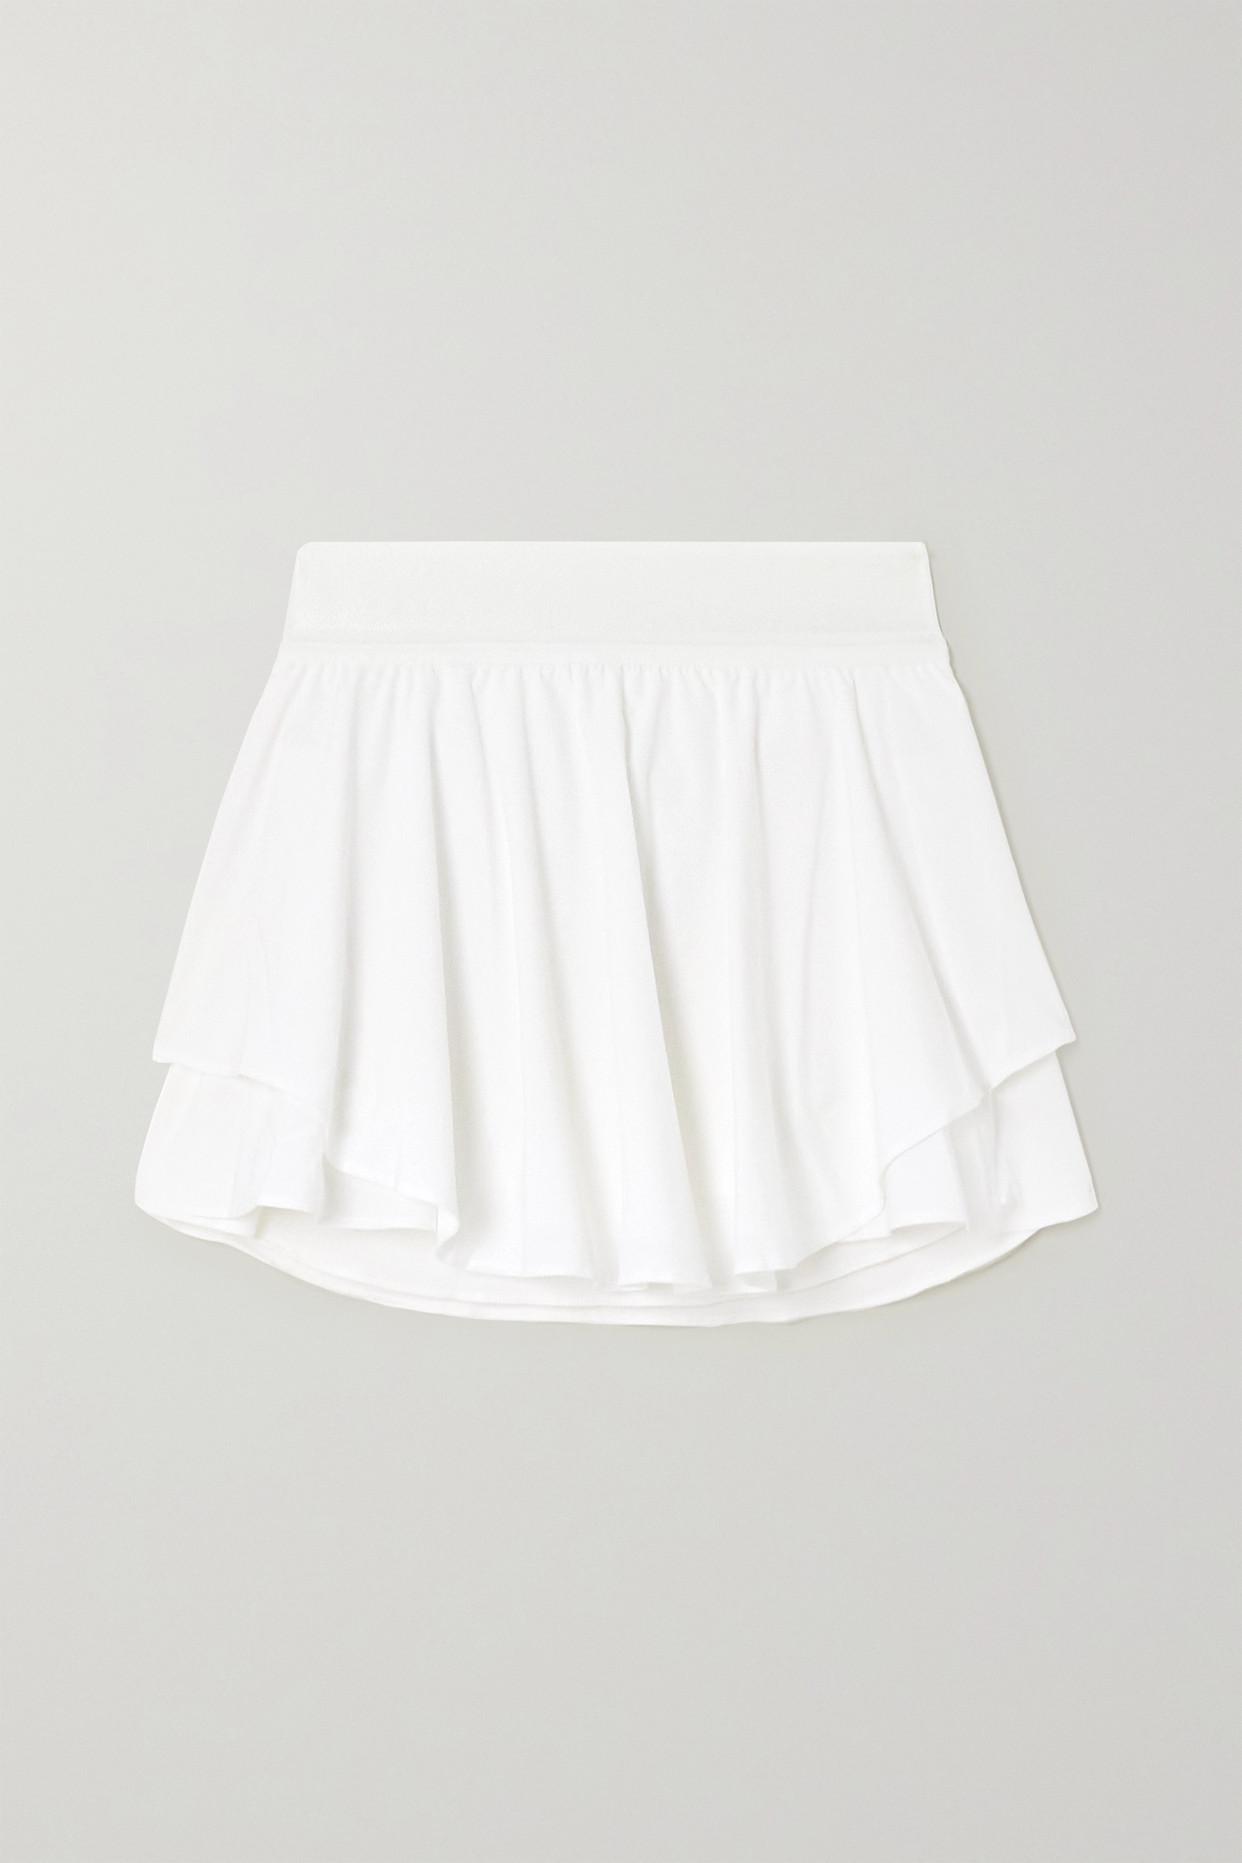 Pace Rival Long stretch recycled-Swift skirt